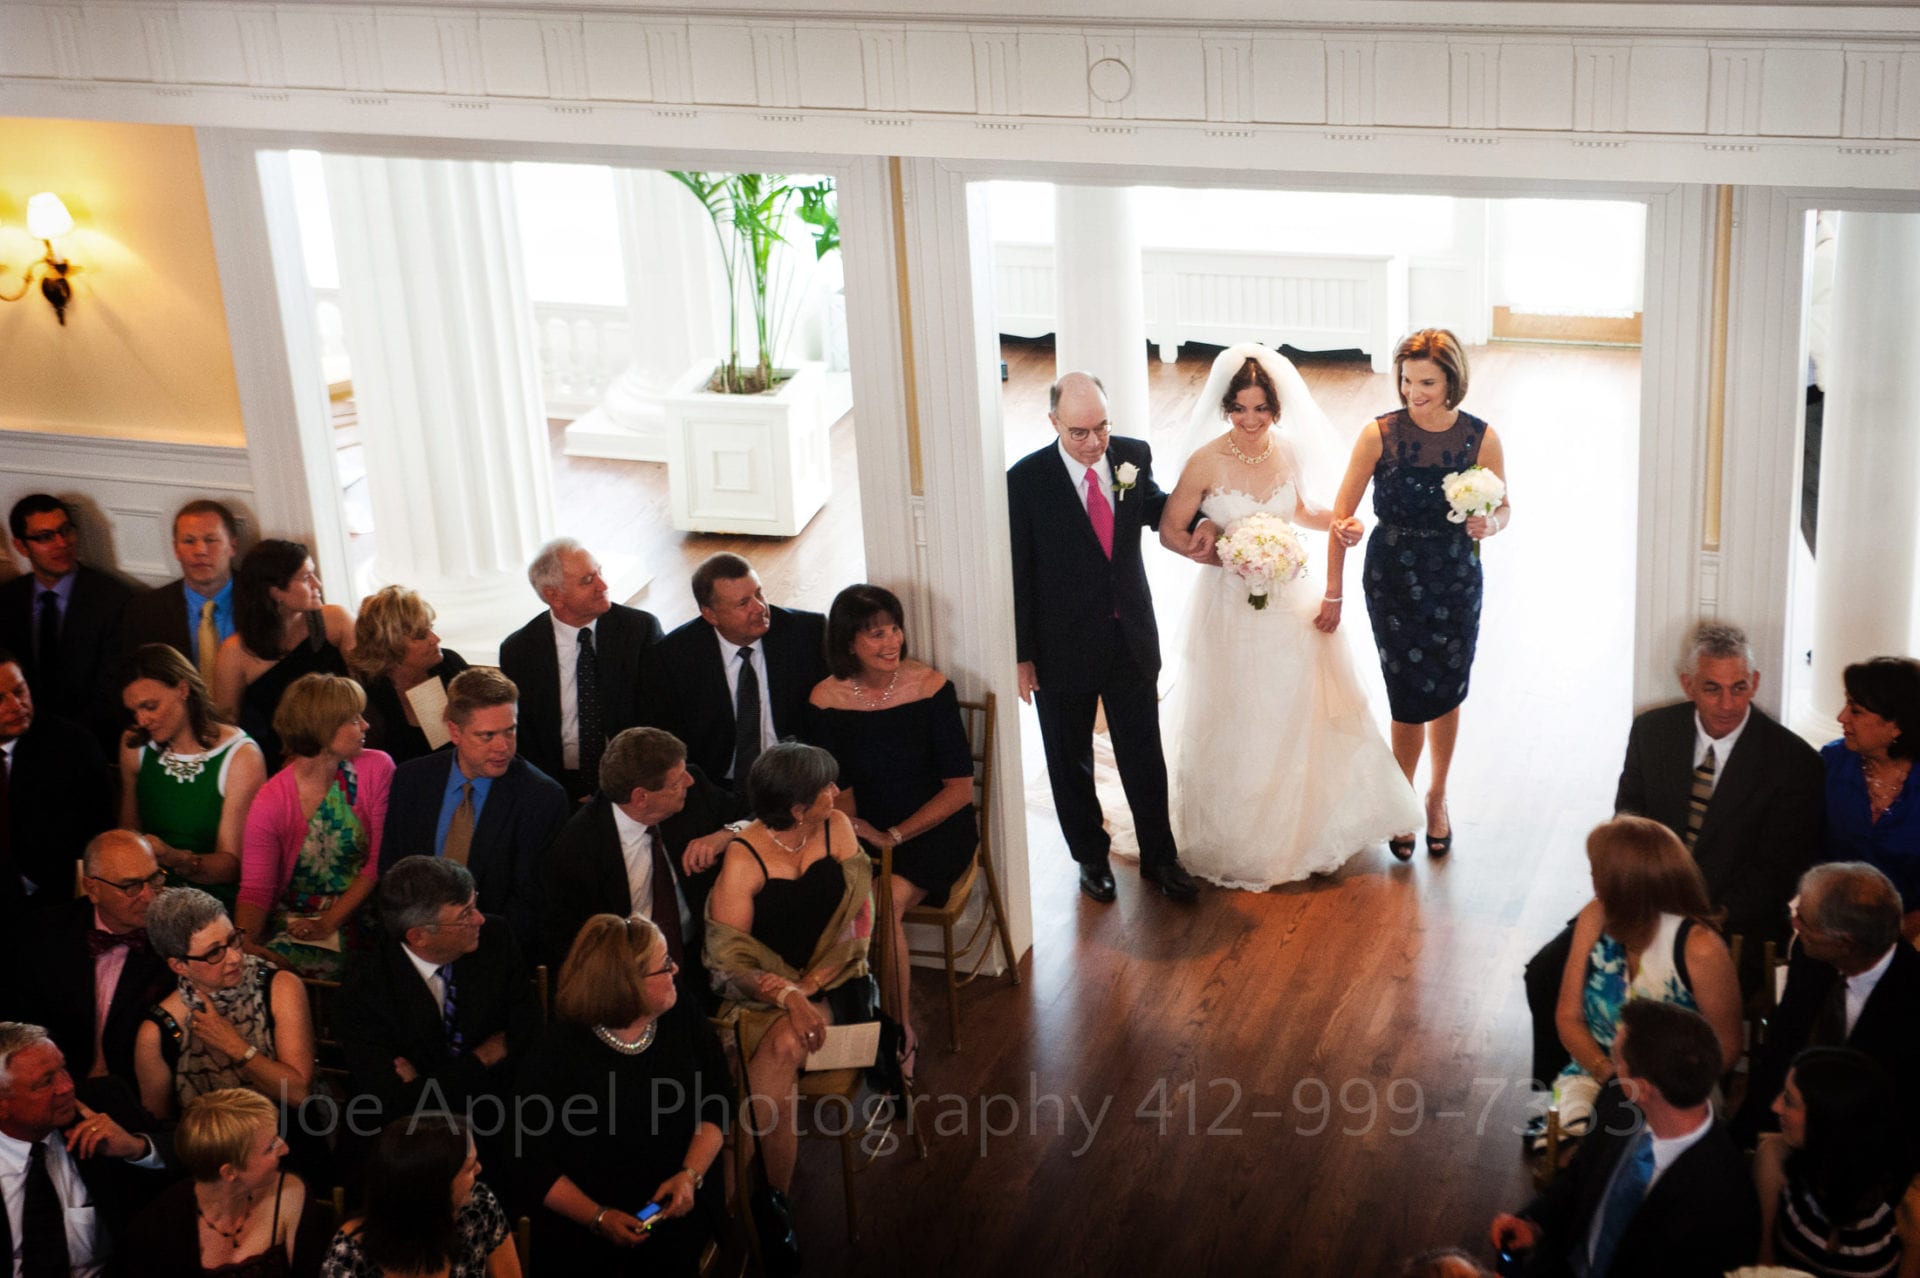 guests watch as a brides parents walk her down the aisle